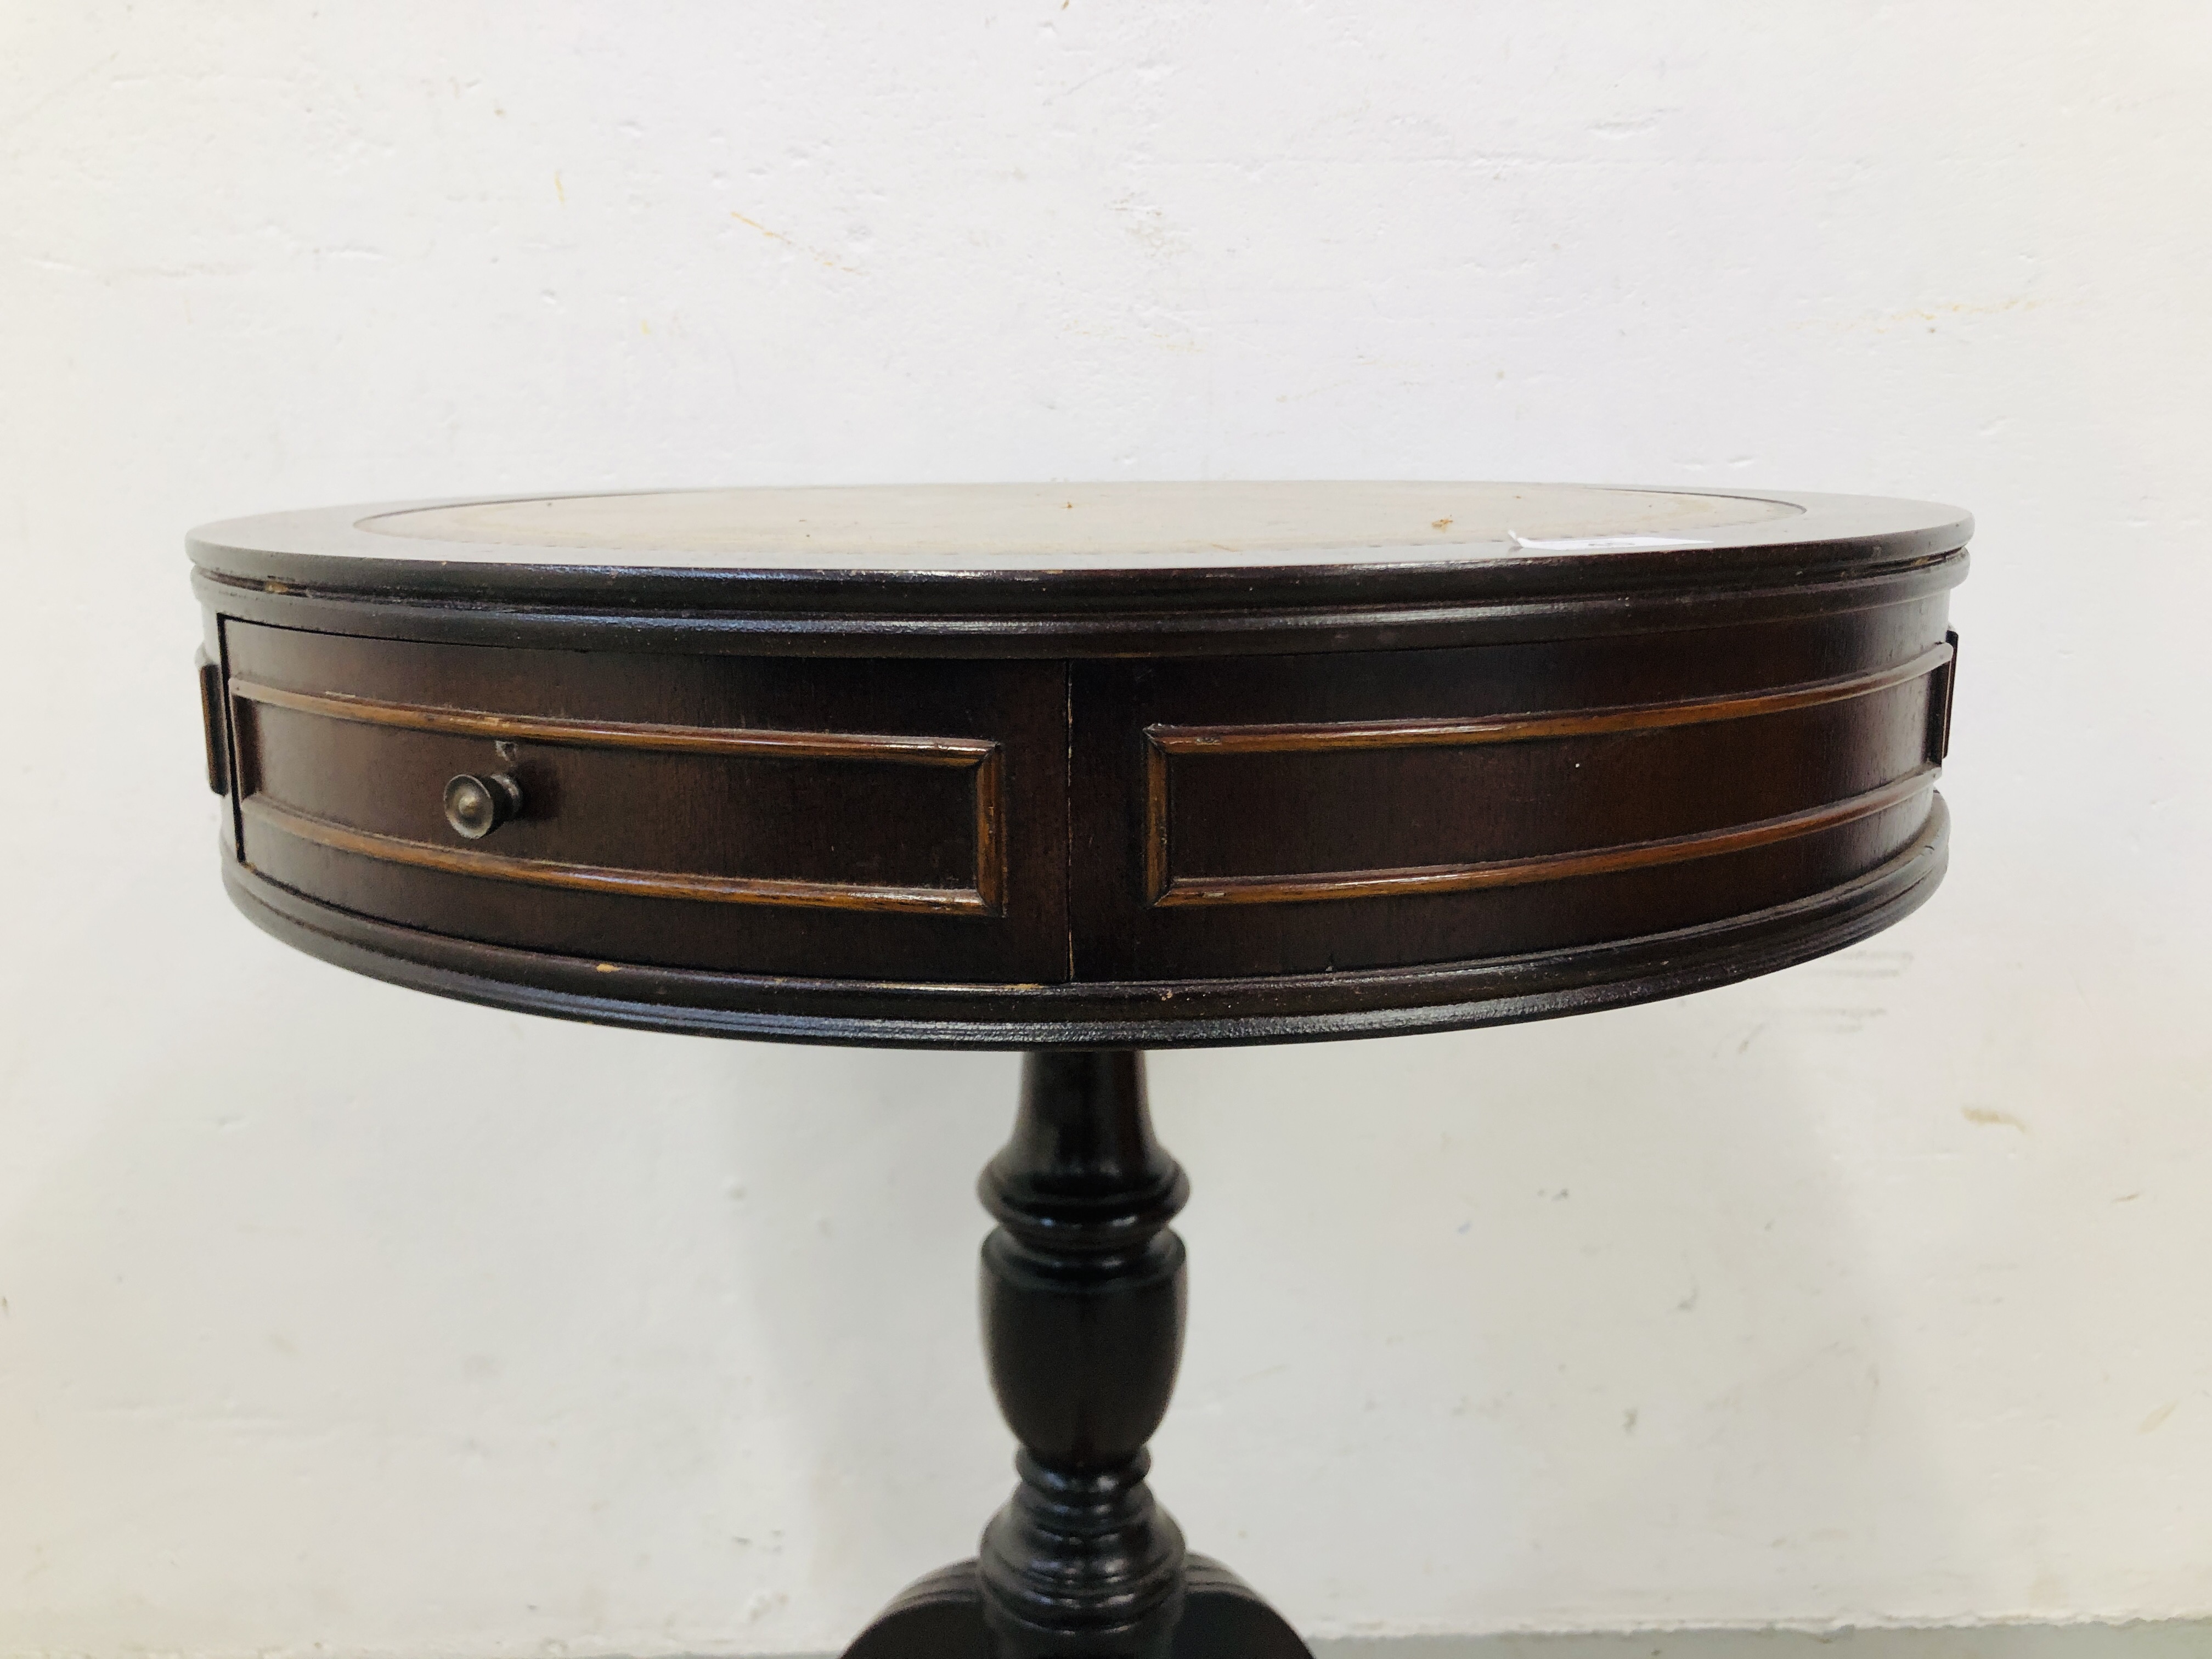 REPRODUCTION SINGLE PEDESTAL DRUM TABLE WITH TOOLED LEATHER TOP - Image 3 of 7